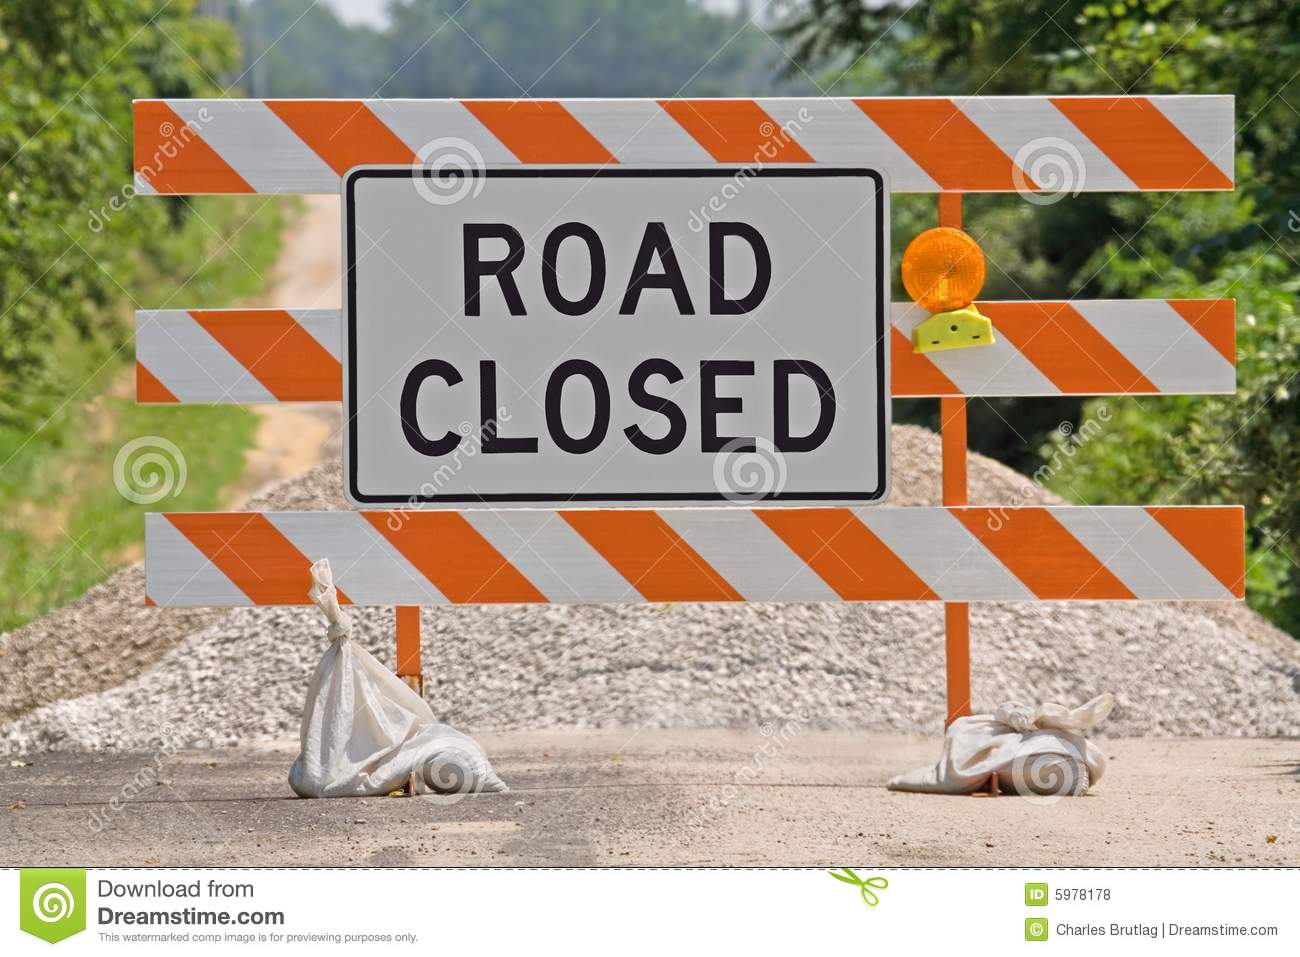 Road Closed Sign Royalty Free Stock Photos   Image  5978178